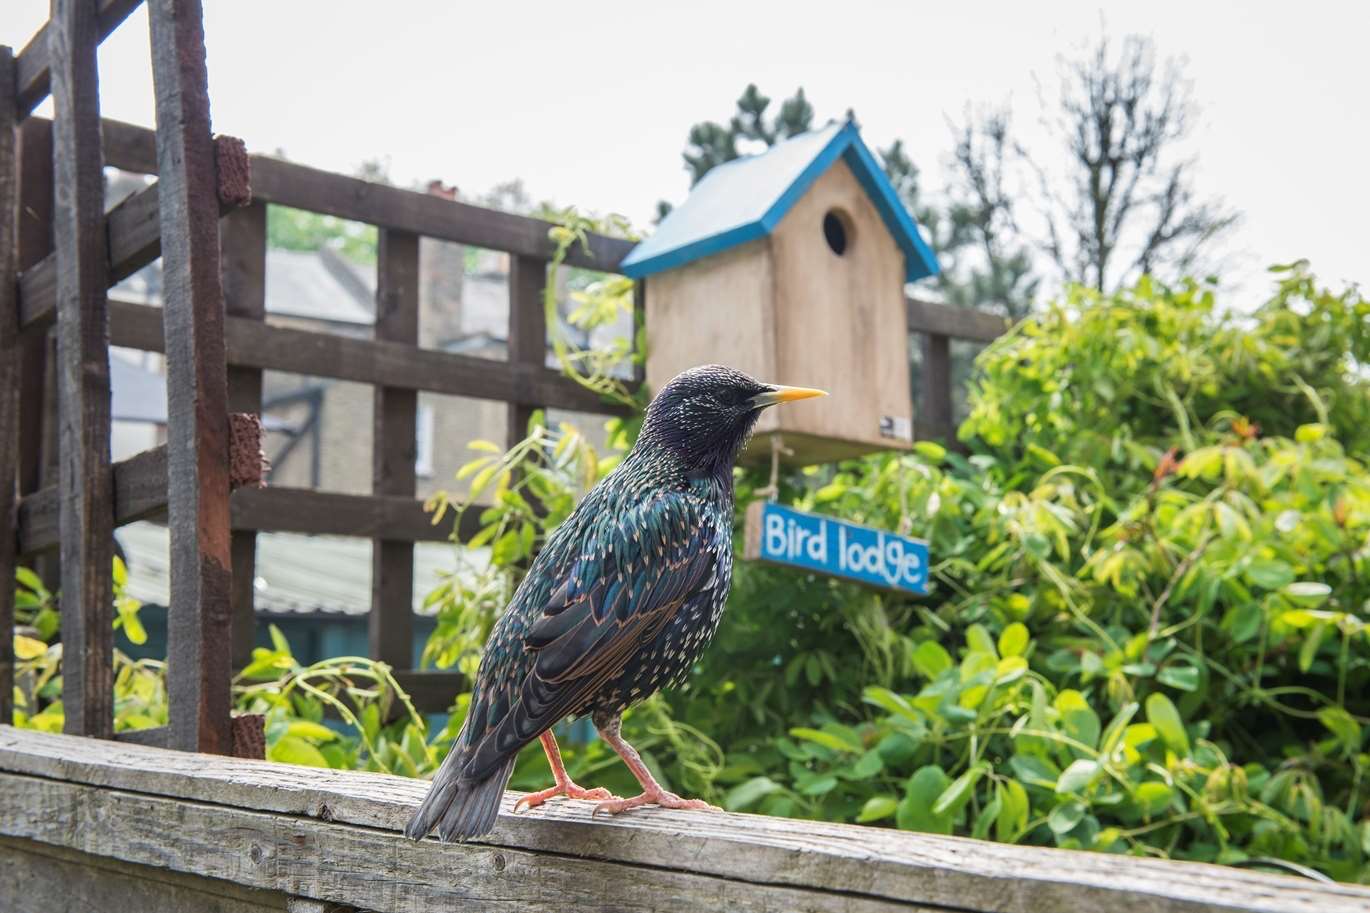 Sightings of well-known species such as starlings experienced a drop during the event last year, although we spotted more than 8.5m birds in total